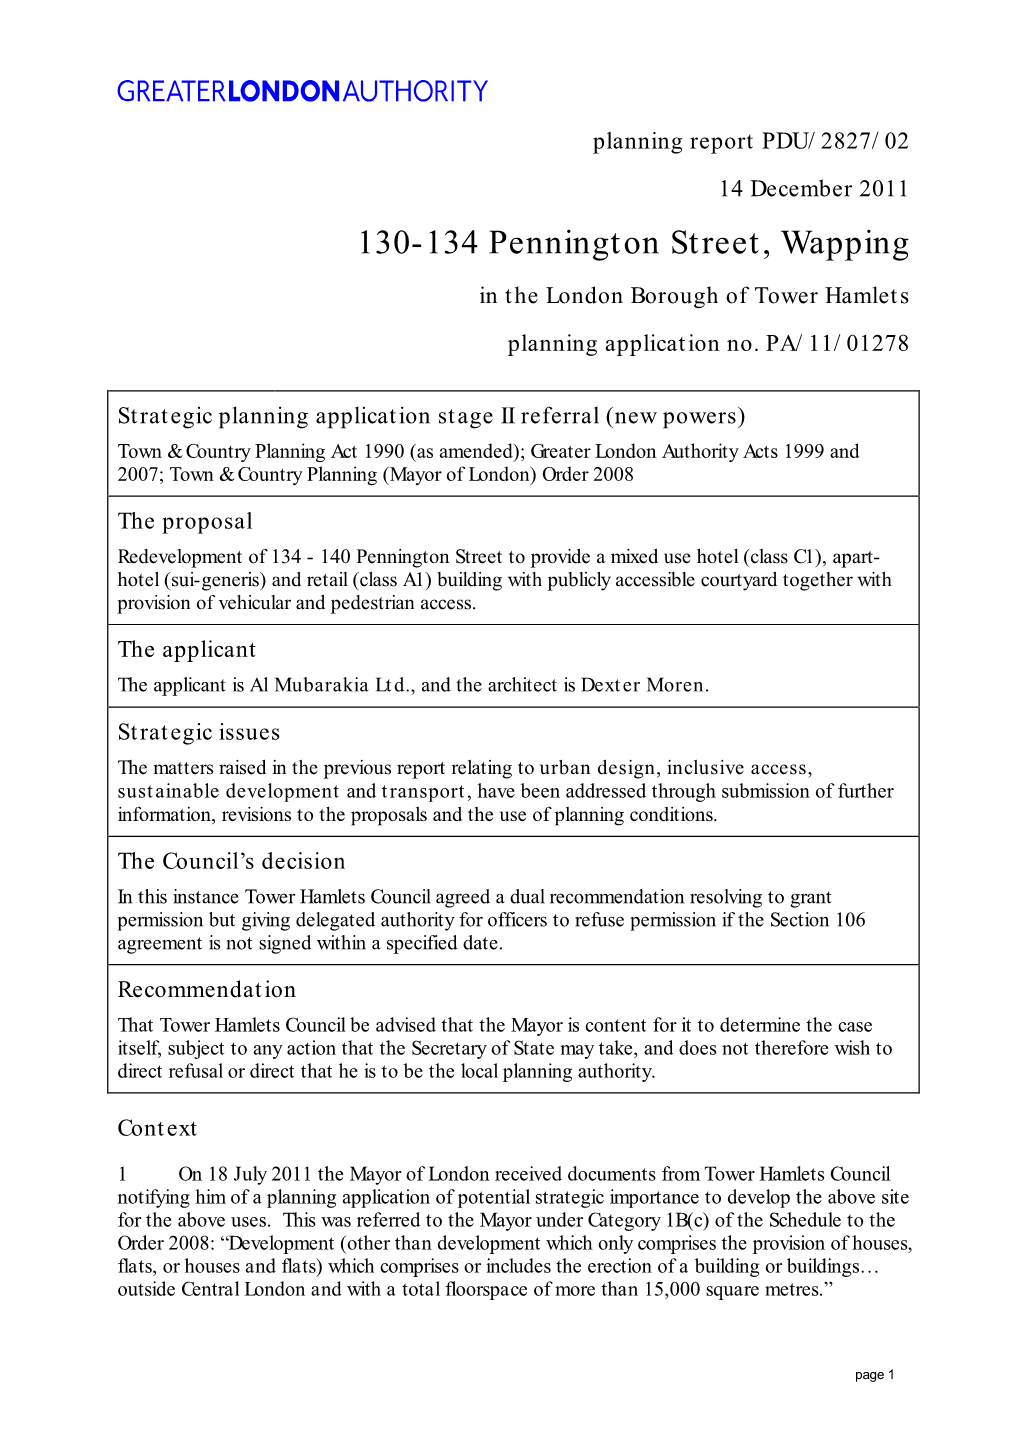 130-134 Pennington Street, Wapping in the London Borough of Tower Hamlets Planning Application No